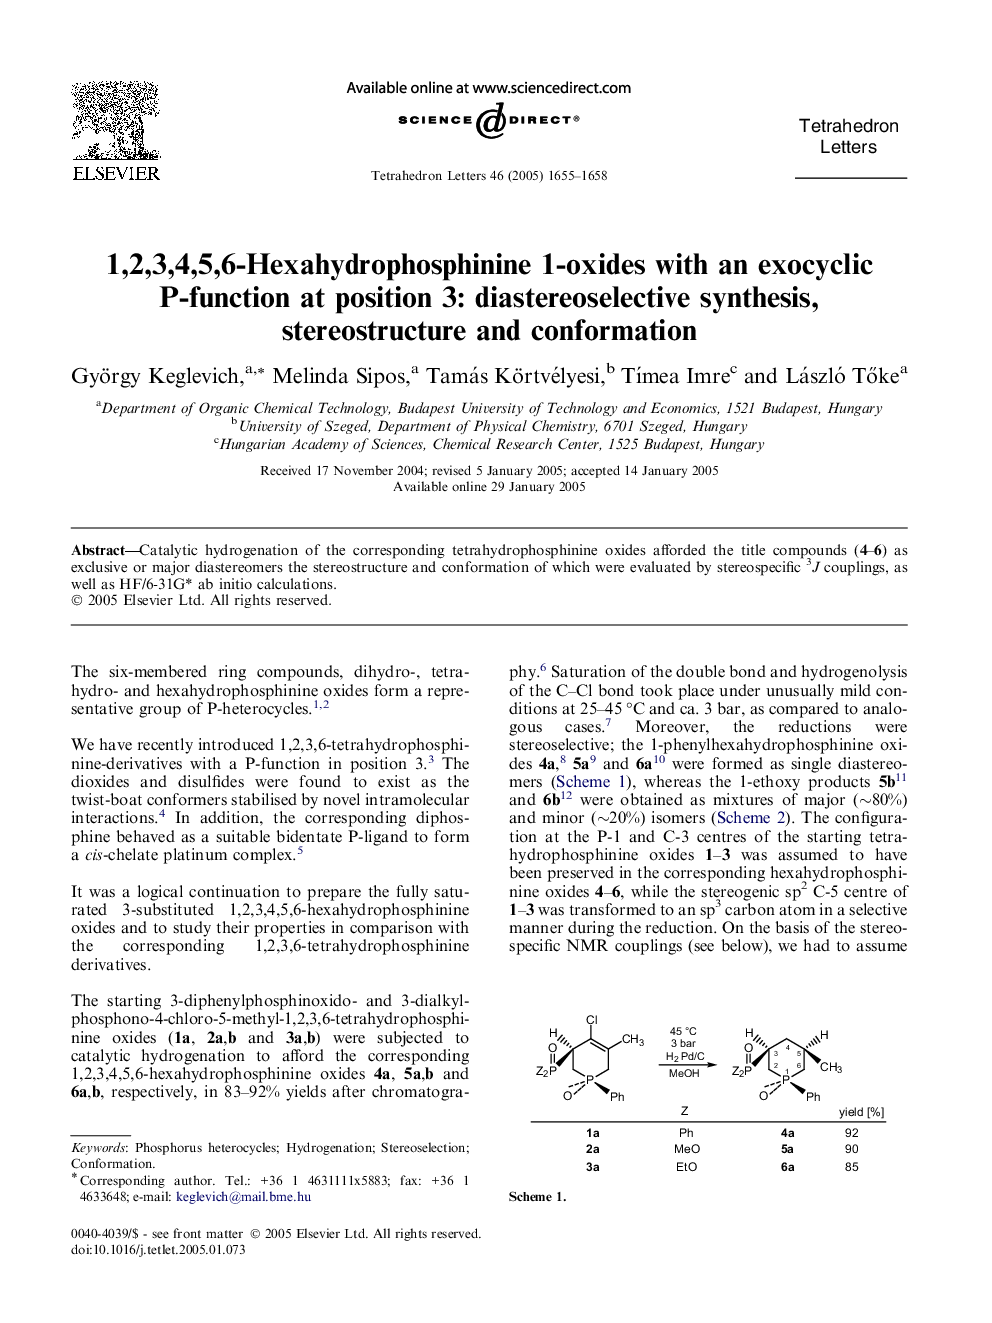 1,2,3,4,5,6-Hexahydrophosphinine 1-oxides with an exocyclic P-function at position 3: diastereoselective synthesis, stereostructure and conformation